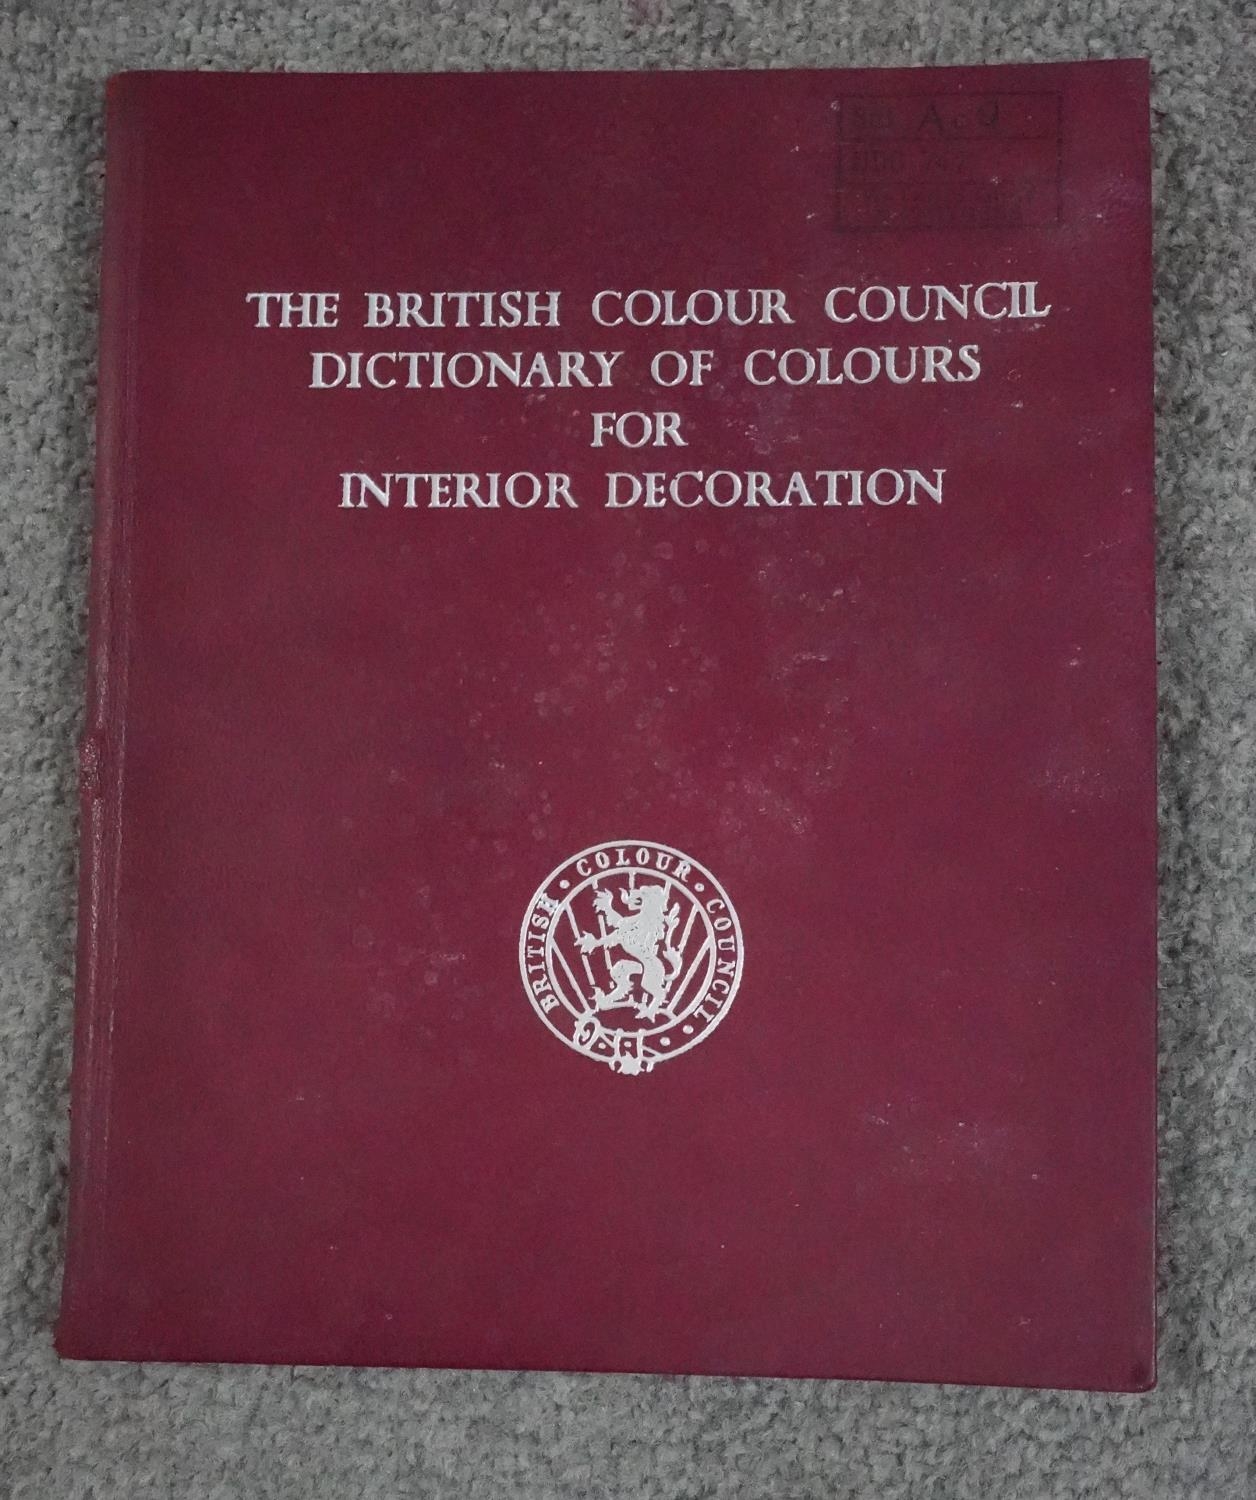 The British Colour Council Dictionary of Colours for Interior Decoration. Edition 2943, London. - Image 2 of 10